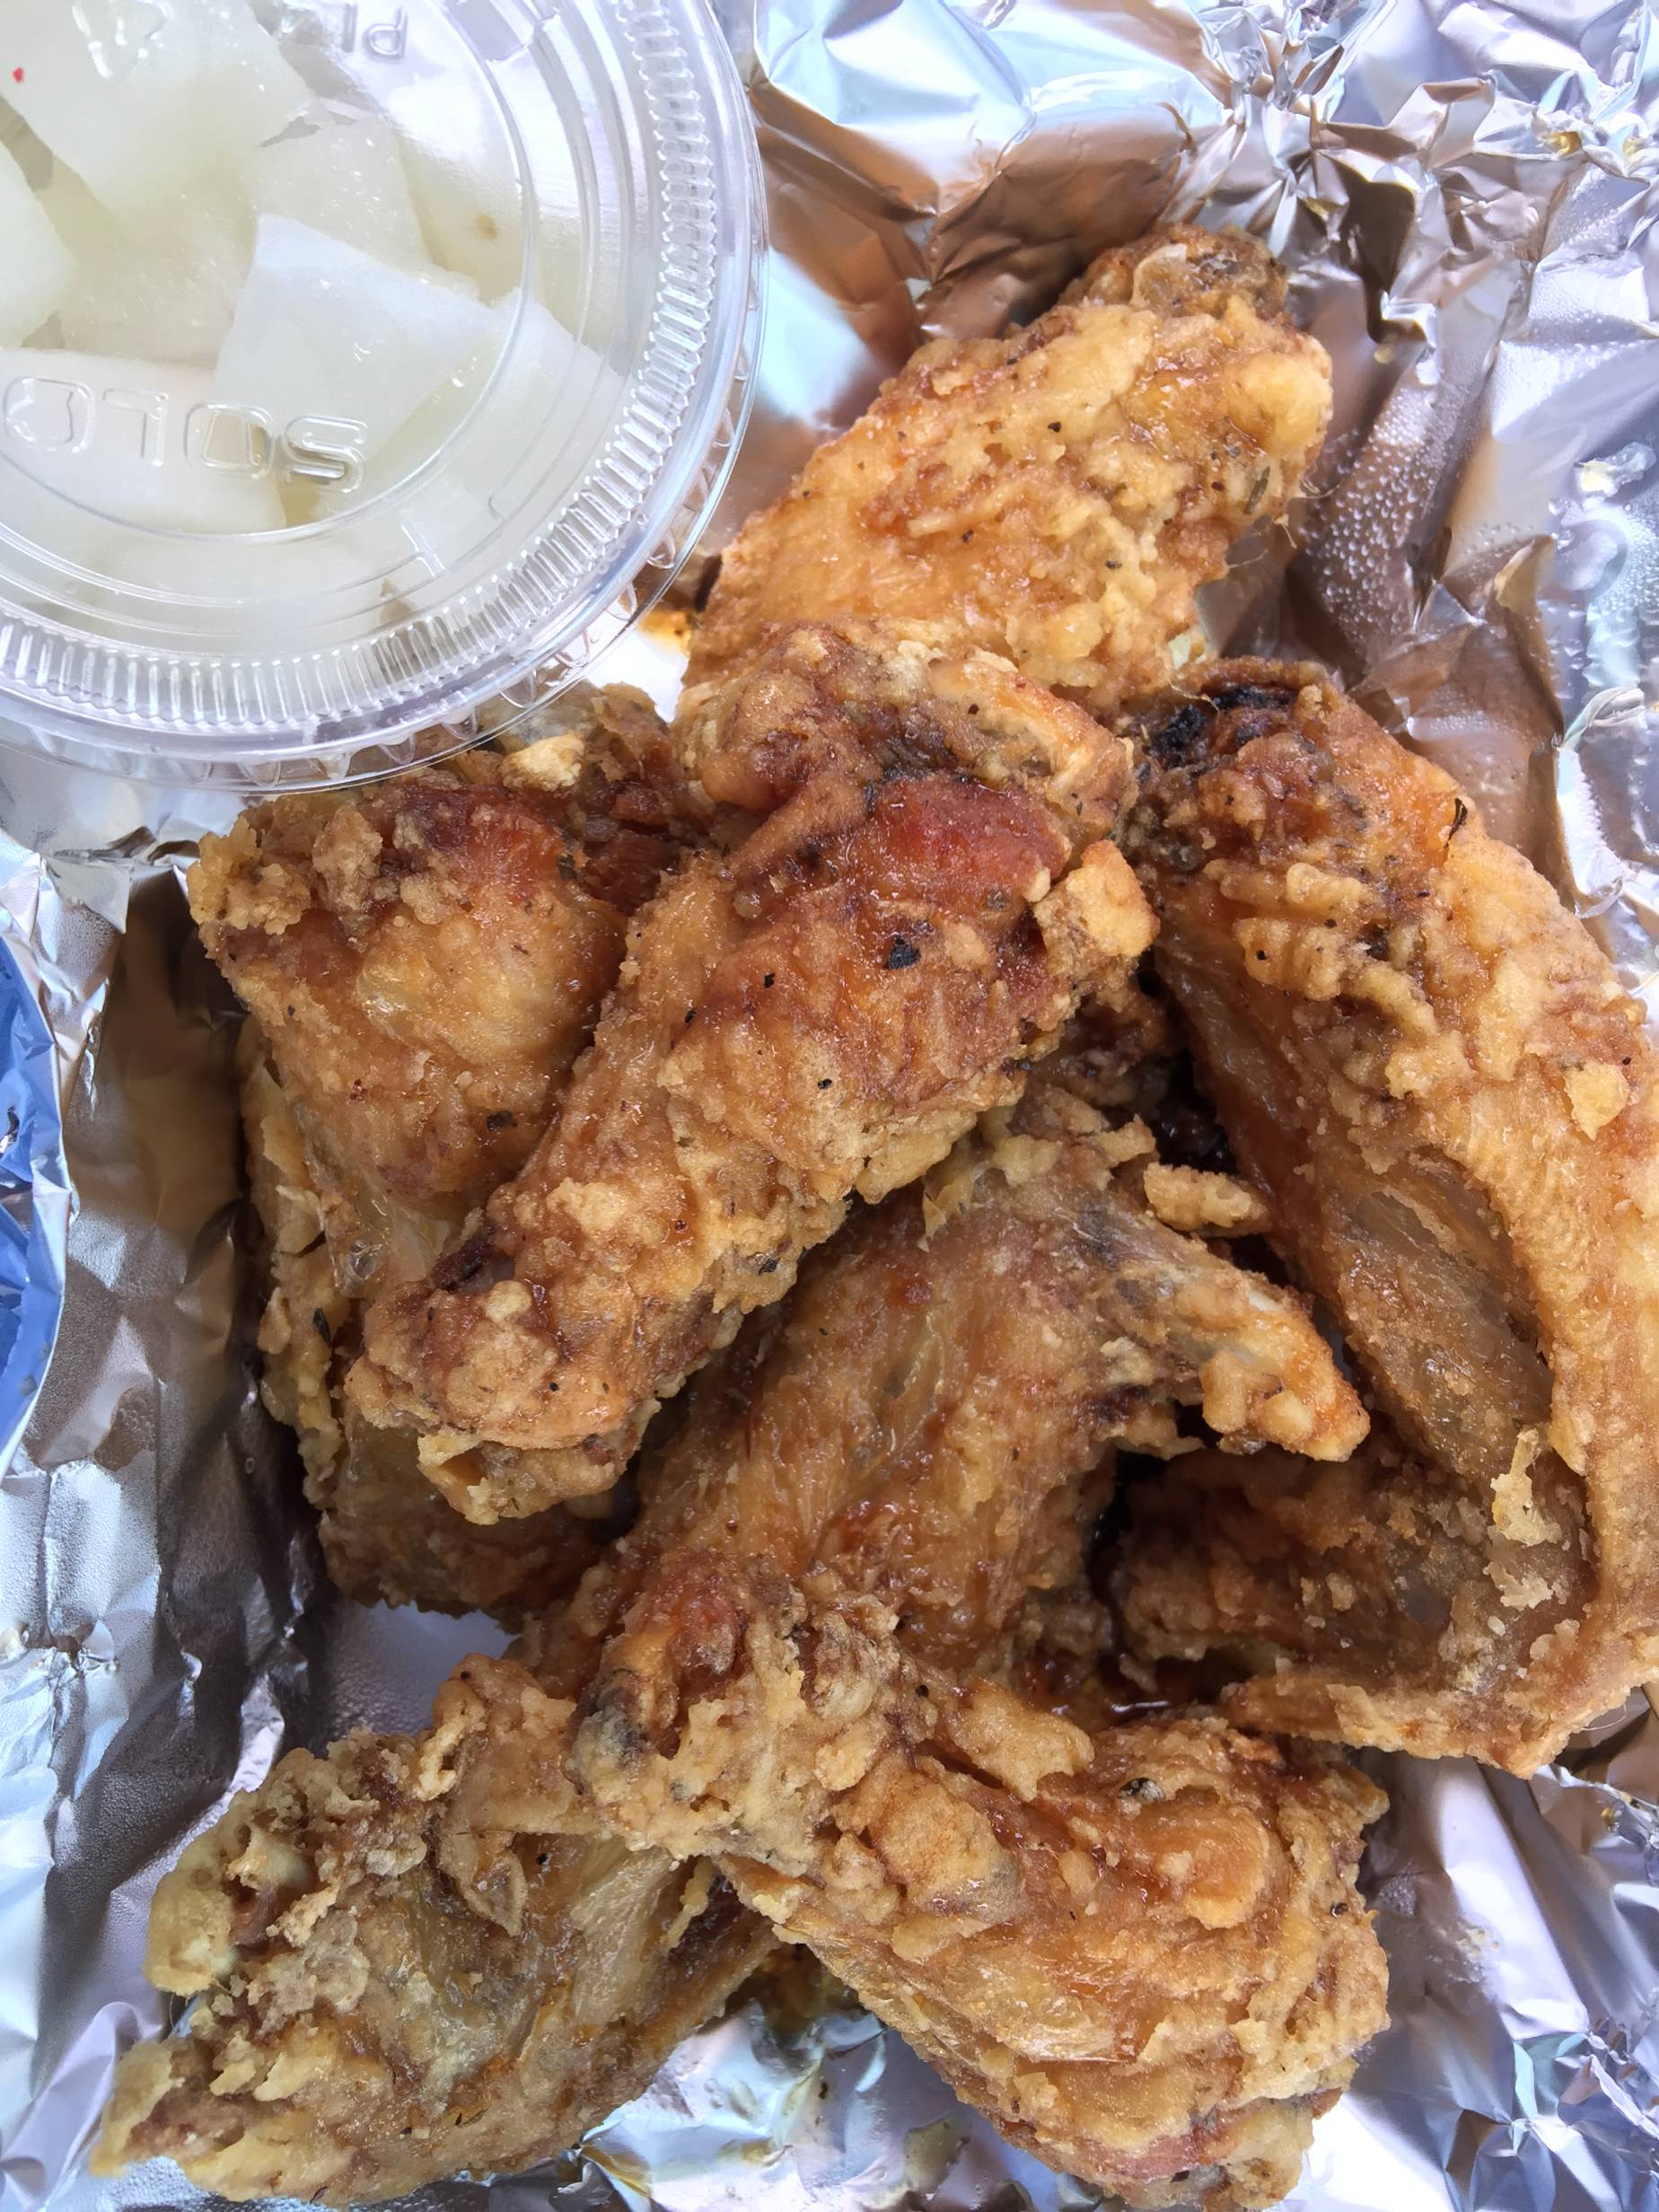 Five wings you don’t want to miss